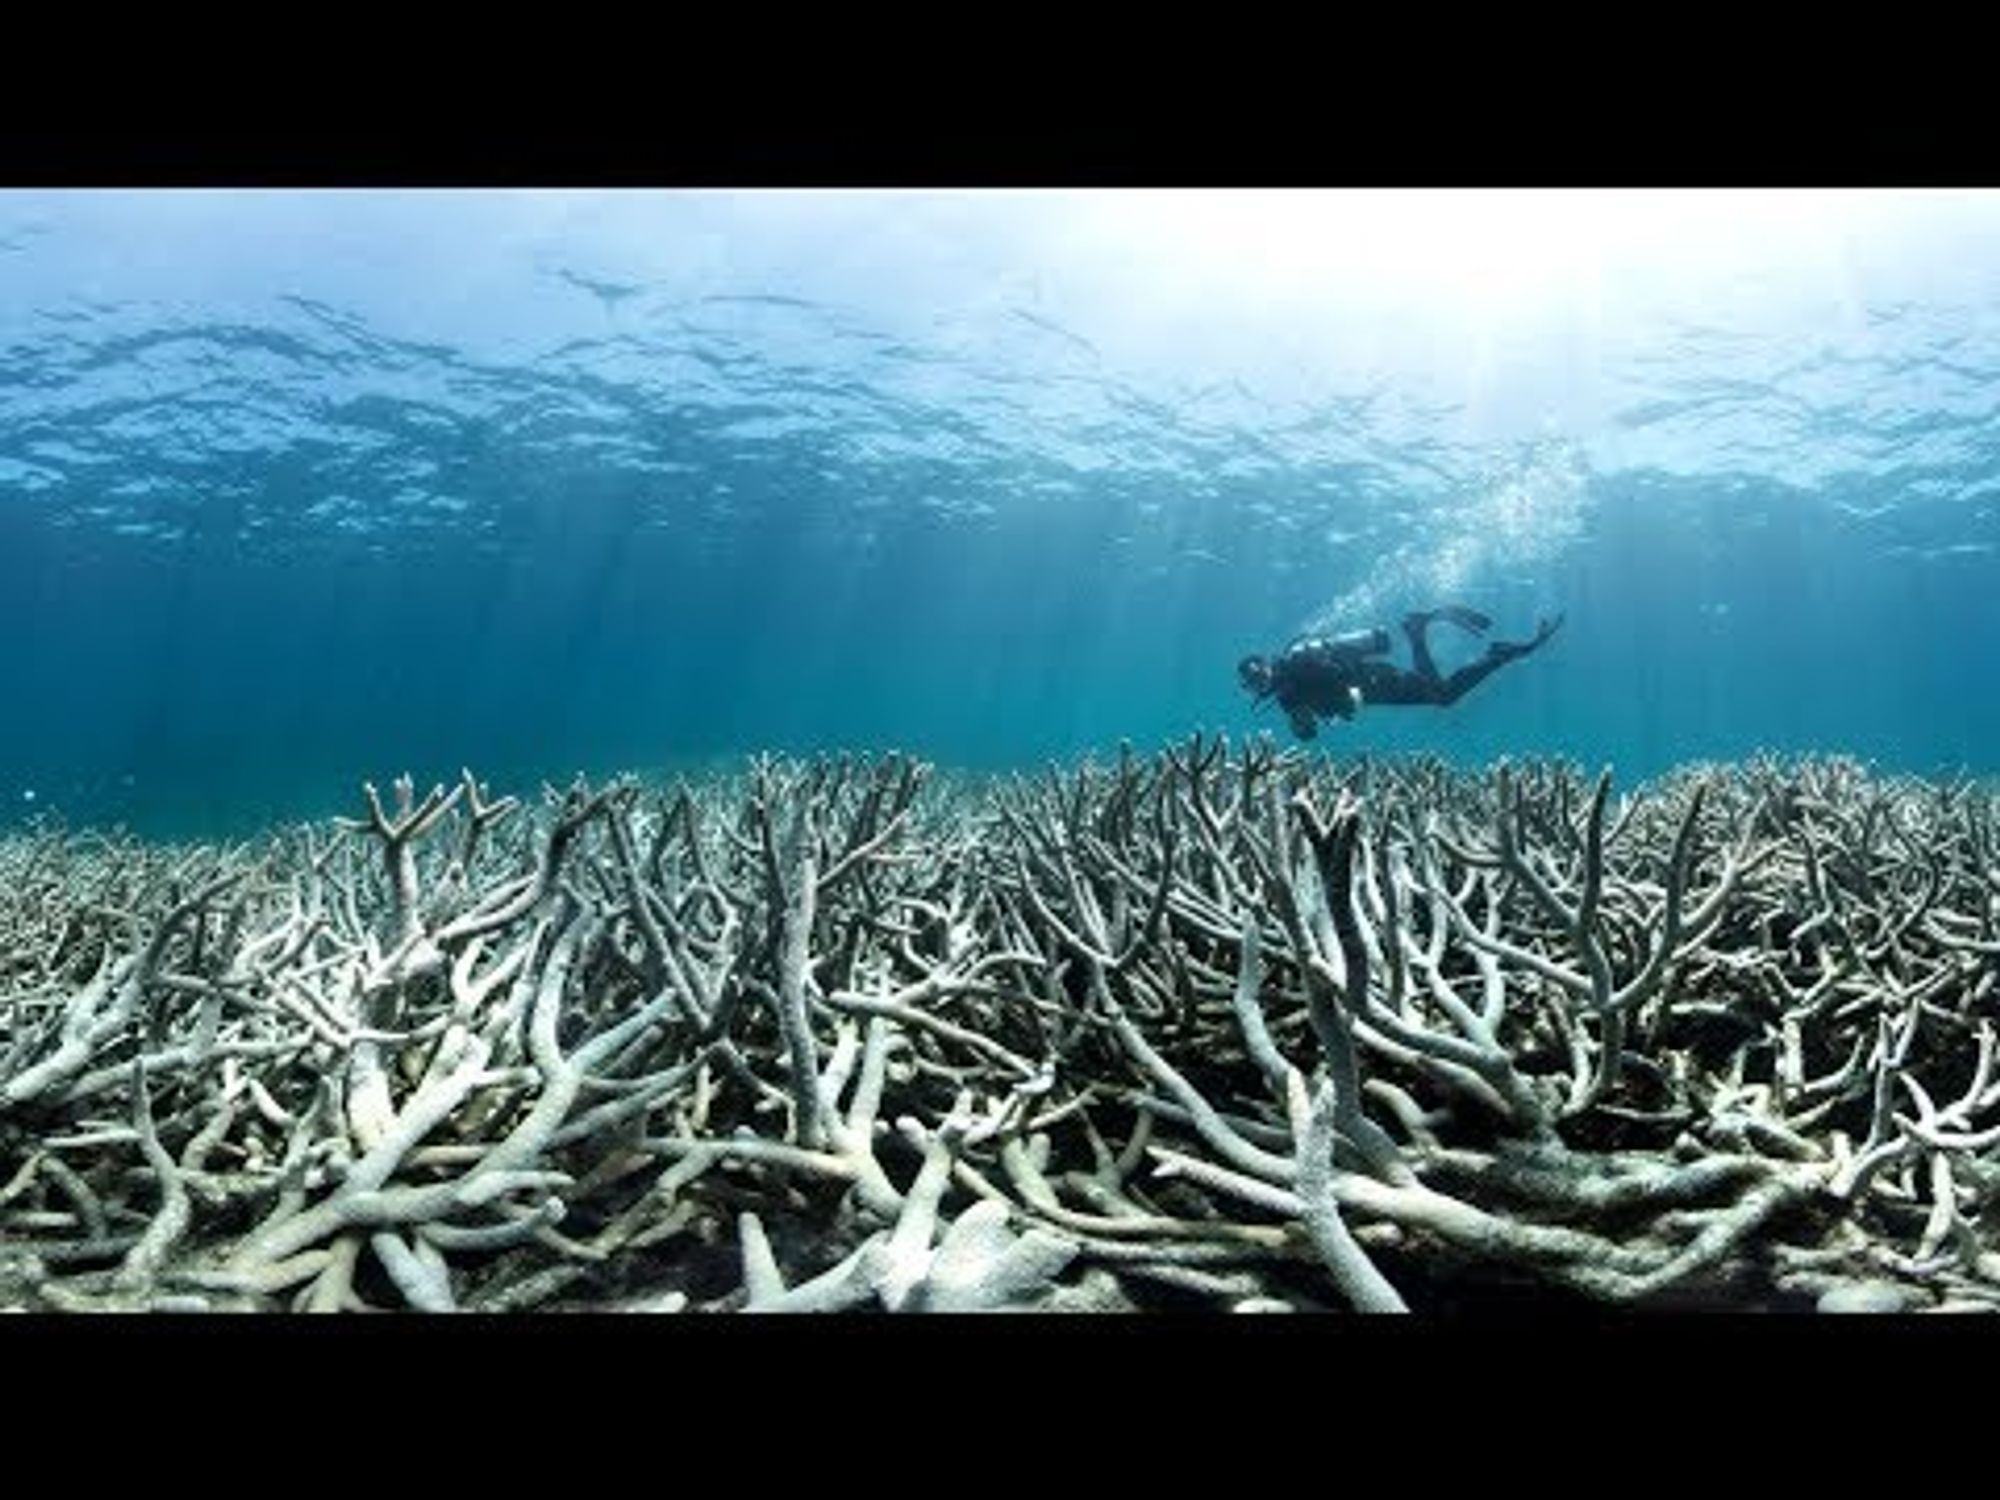 STUDY: the oceans are dying, and if they die, we die - Green - News - Catholic Online